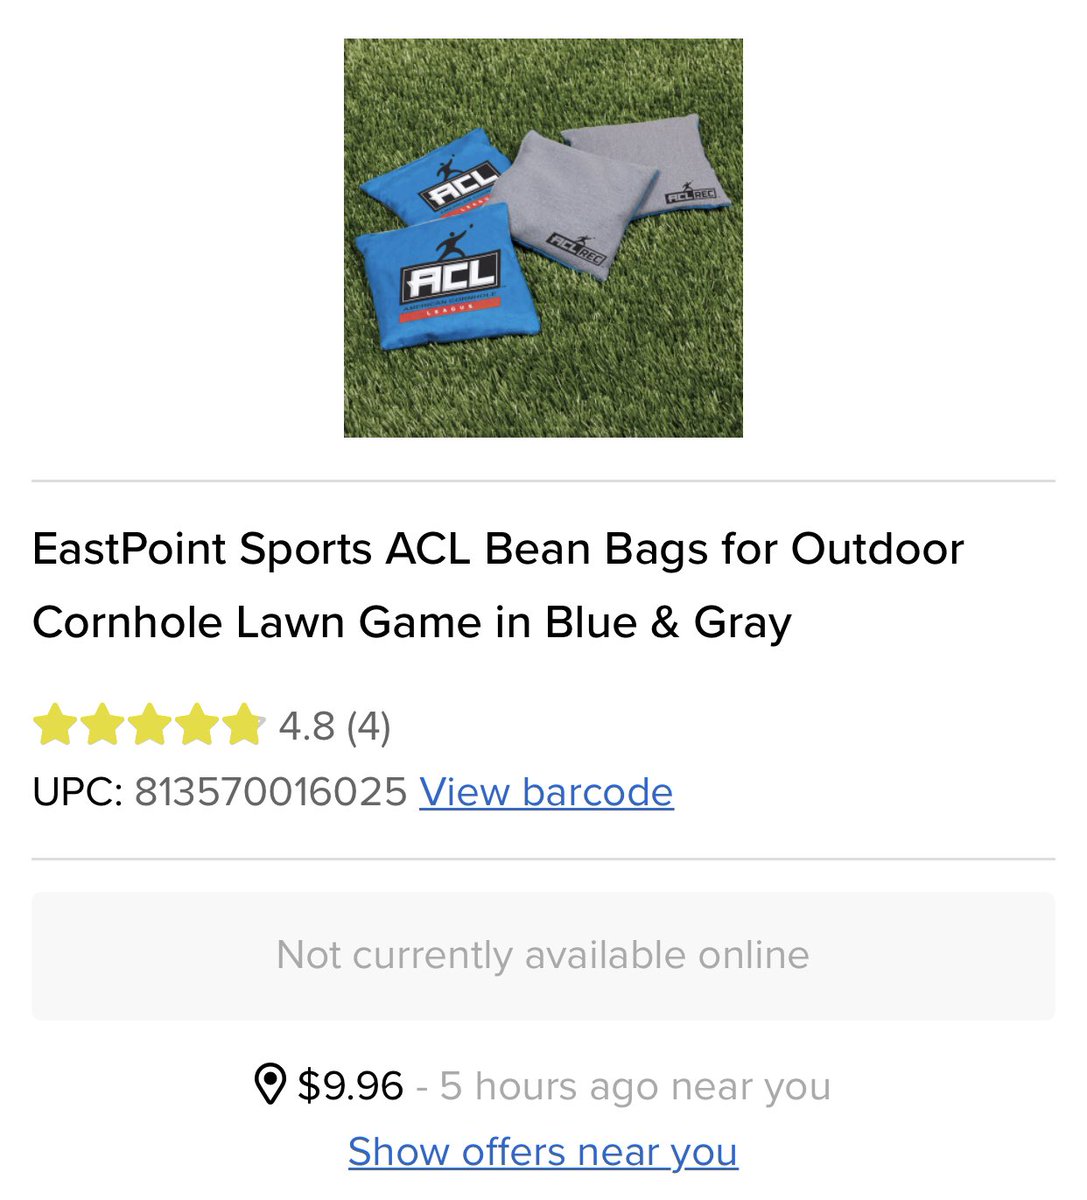 The ACL Bean Bags retails for $10 but can be found at less than $8 in some stores